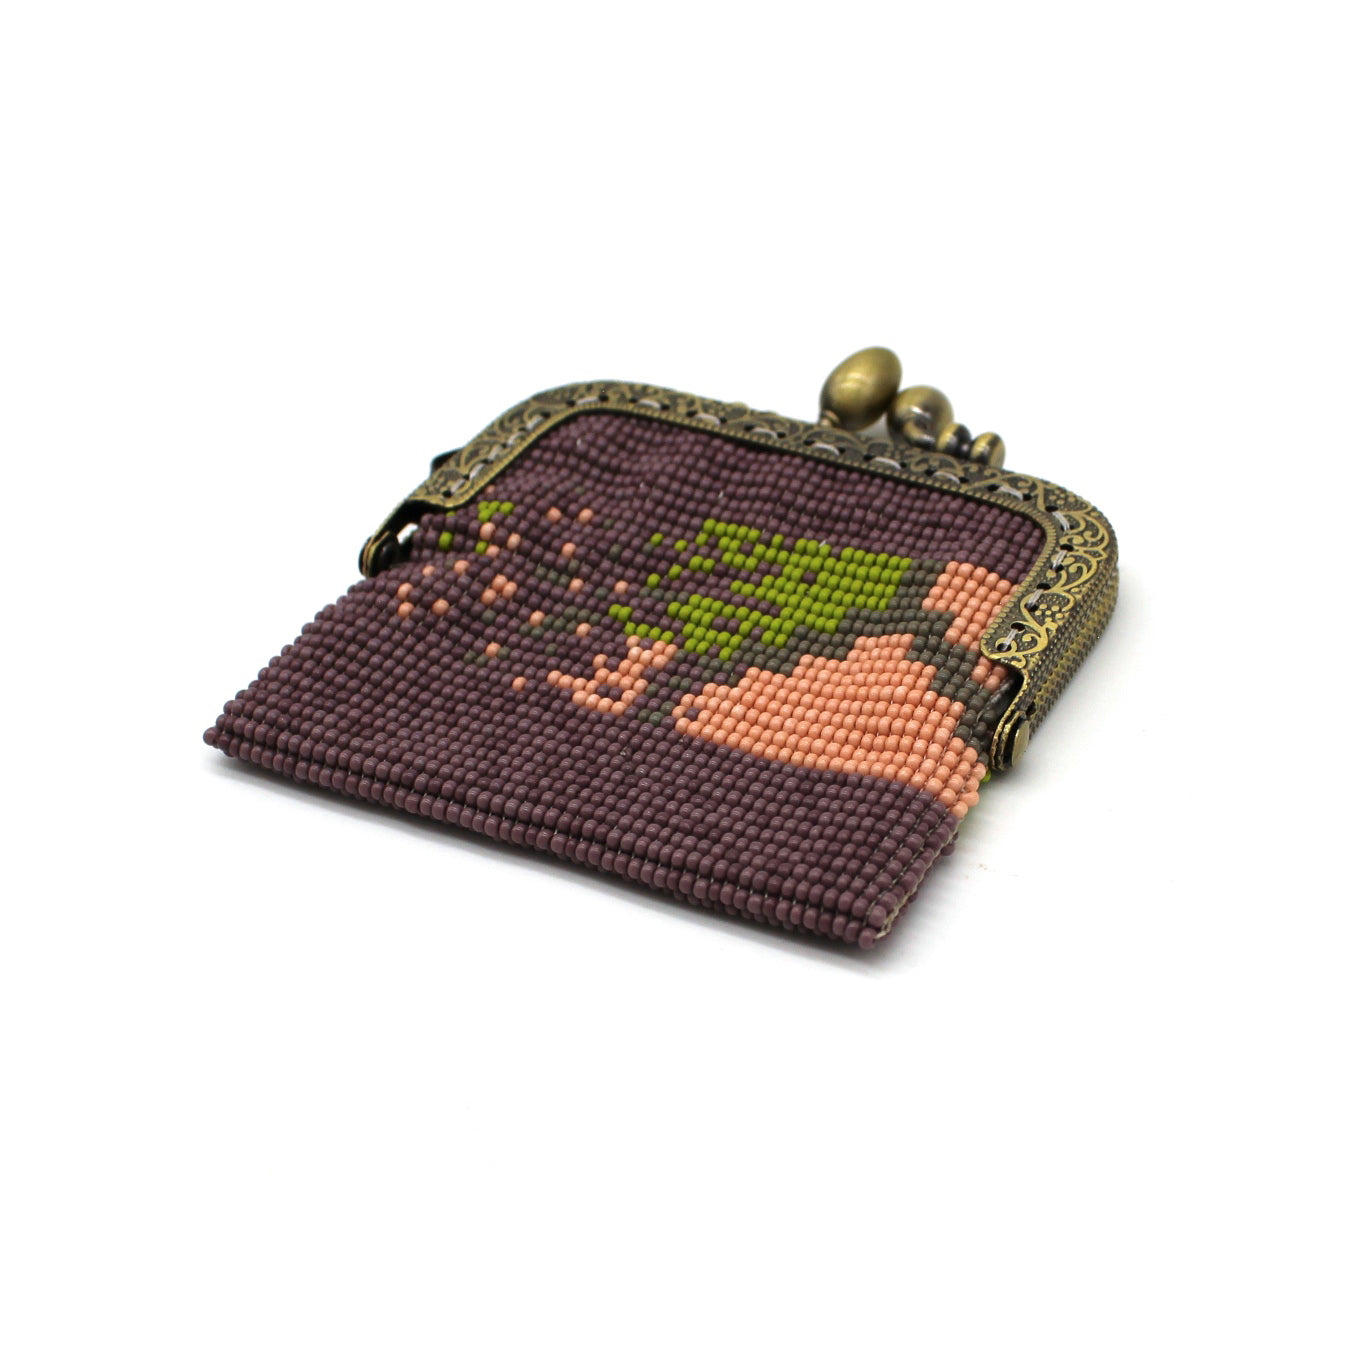 Glass bead coin purse with metal frame - Pyramid Lilac